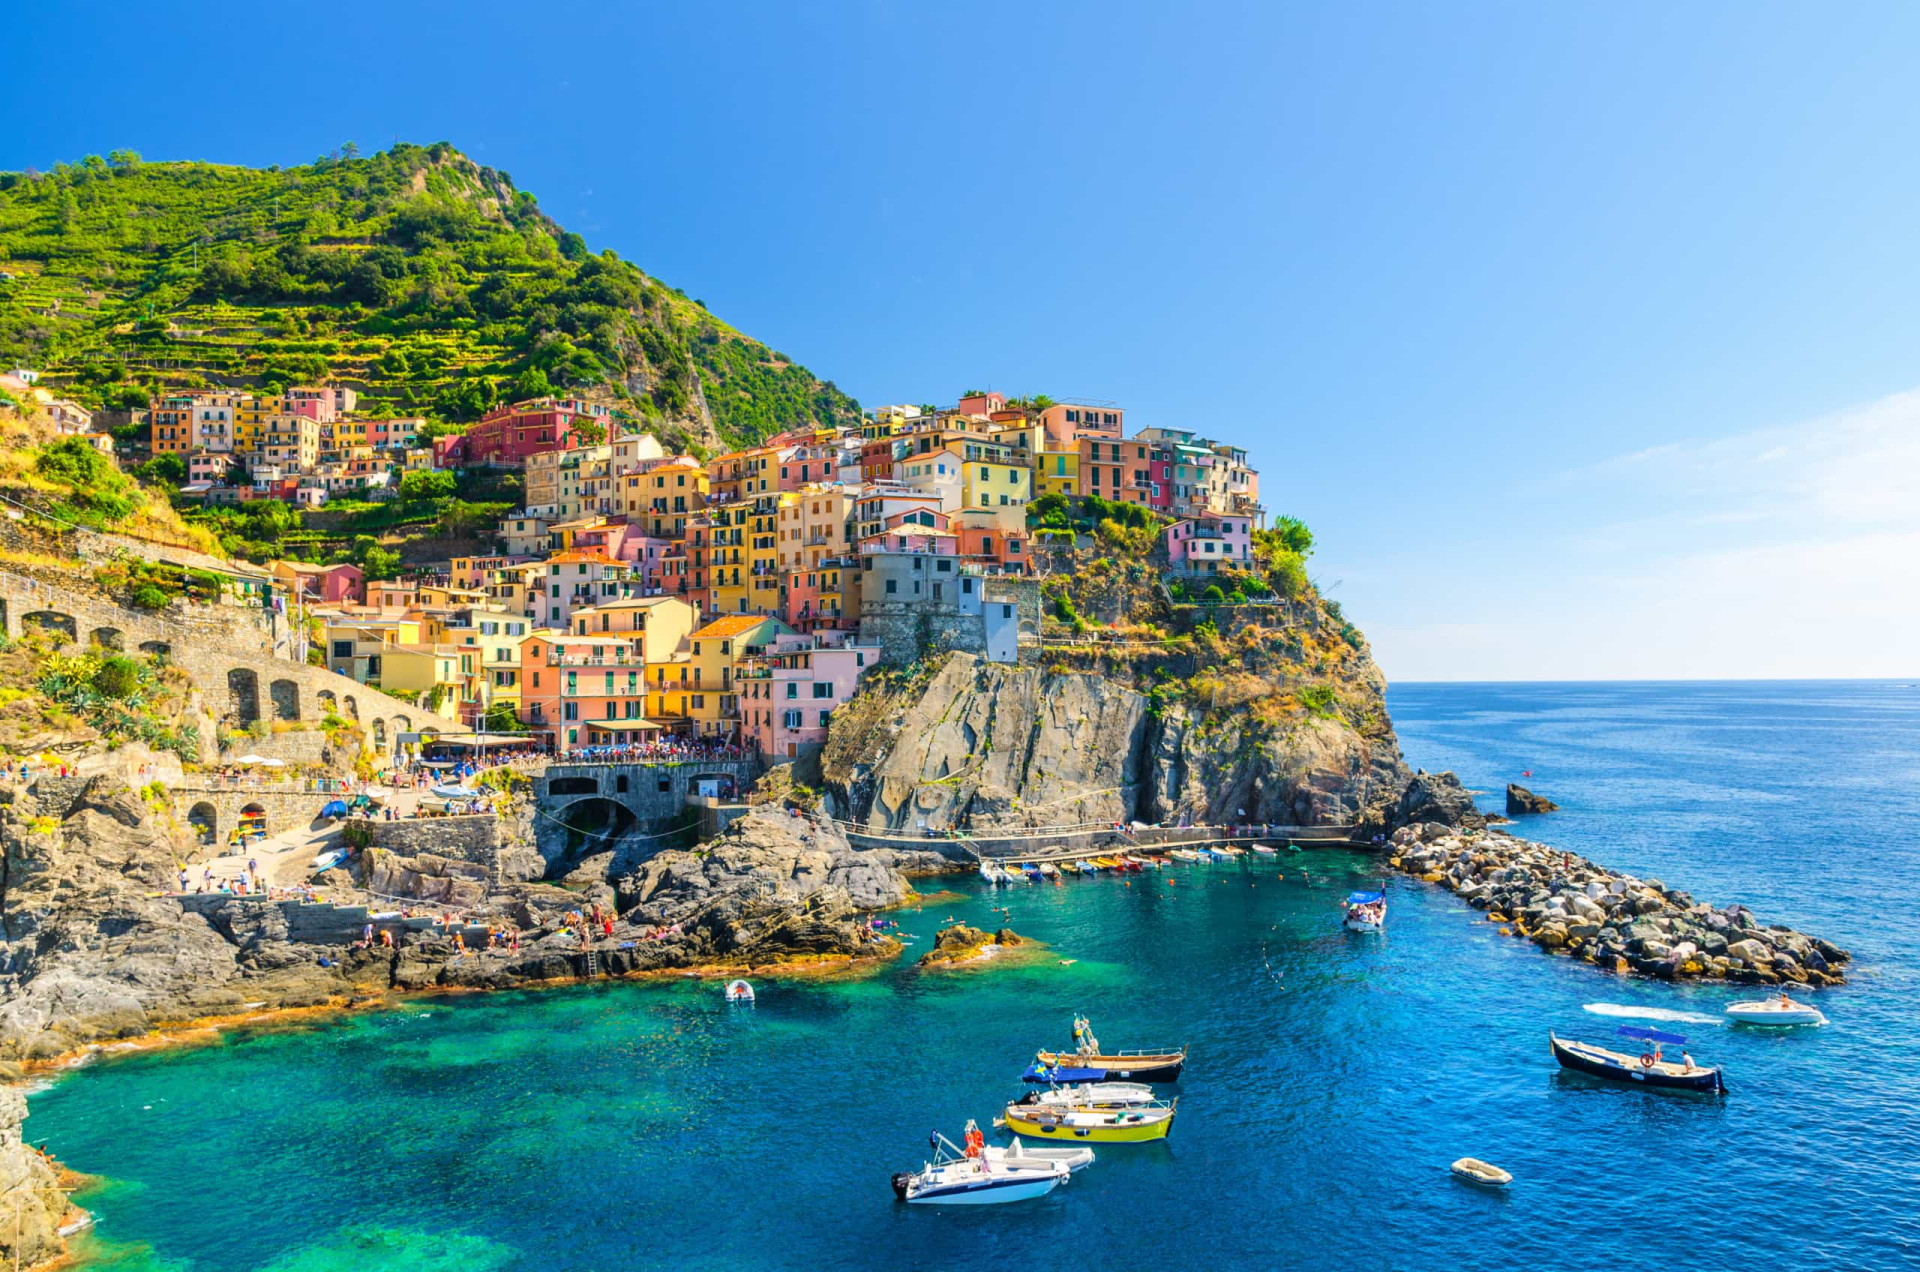 <p>Perched on a promontory and daubed in a palette of merry colors, Manarola is the Italian Riviera's Instagram favorite.</p><p>You may also like:<a href="https://www.starsinsider.com/n/493568?utm_source=msn.com&utm_medium=display&utm_campaign=referral_description&utm_content=481361v4en-en_selected"> Celebs you didn't know had children together</a></p>